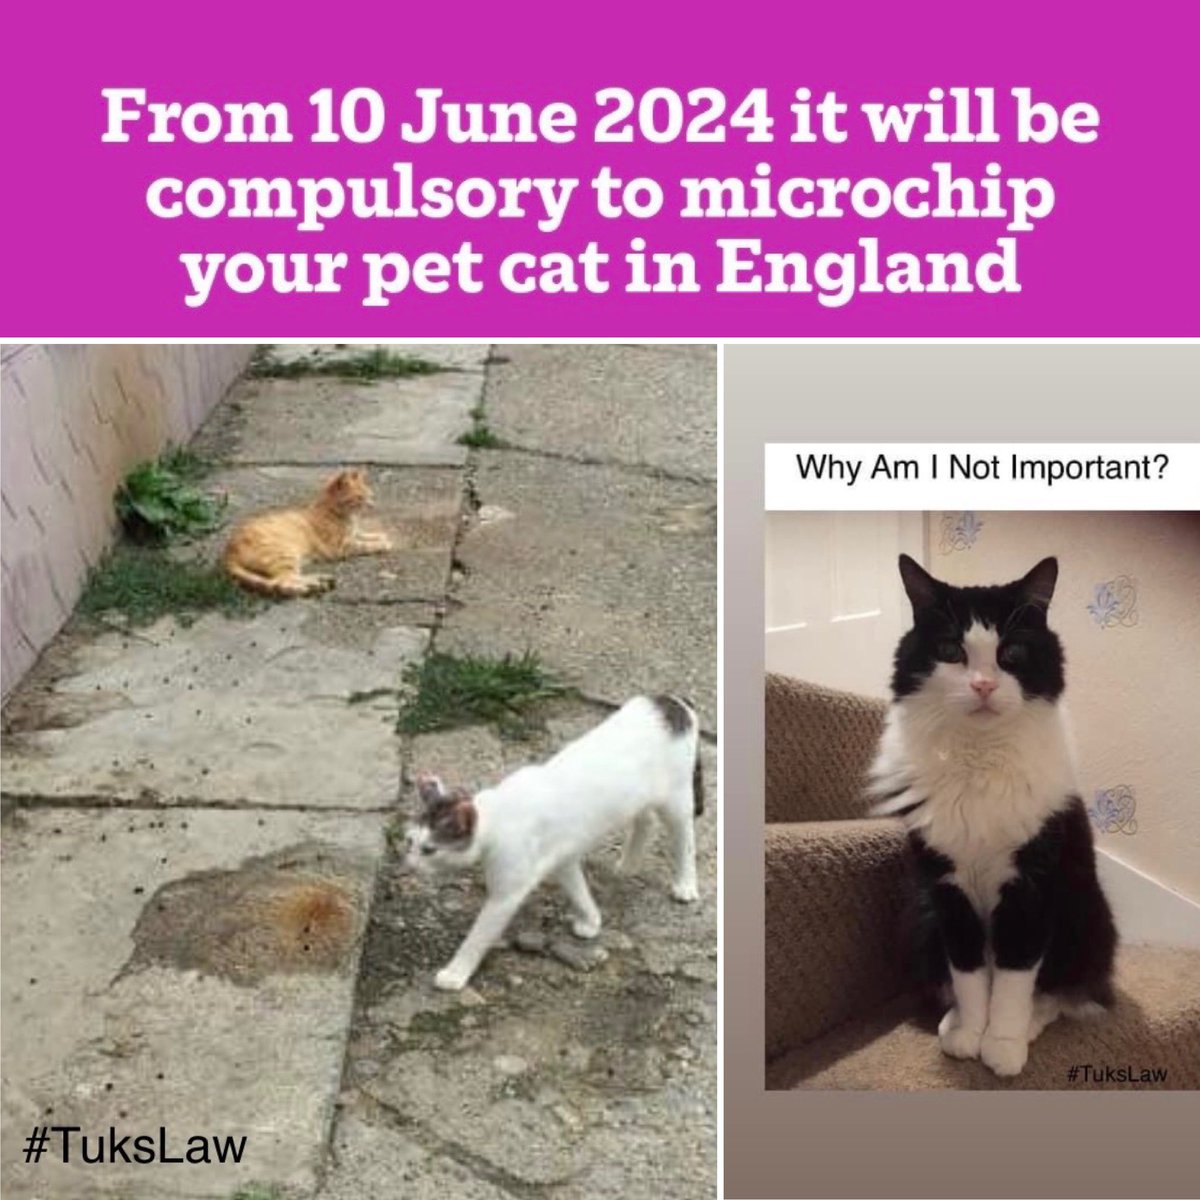 Help us save the lives of cats and ensure they have the same 7 day stray protection as dogs. facebook.com/share/p/gdikKf… Sign Our Petition For A Long Overdue Debate On Euthanasia petition.parliament.uk/petitions/6581… #TuksLaw @CatsProtection @SOSmoggies @APGOCATs @CatsMatterUK @CPMediaTeam